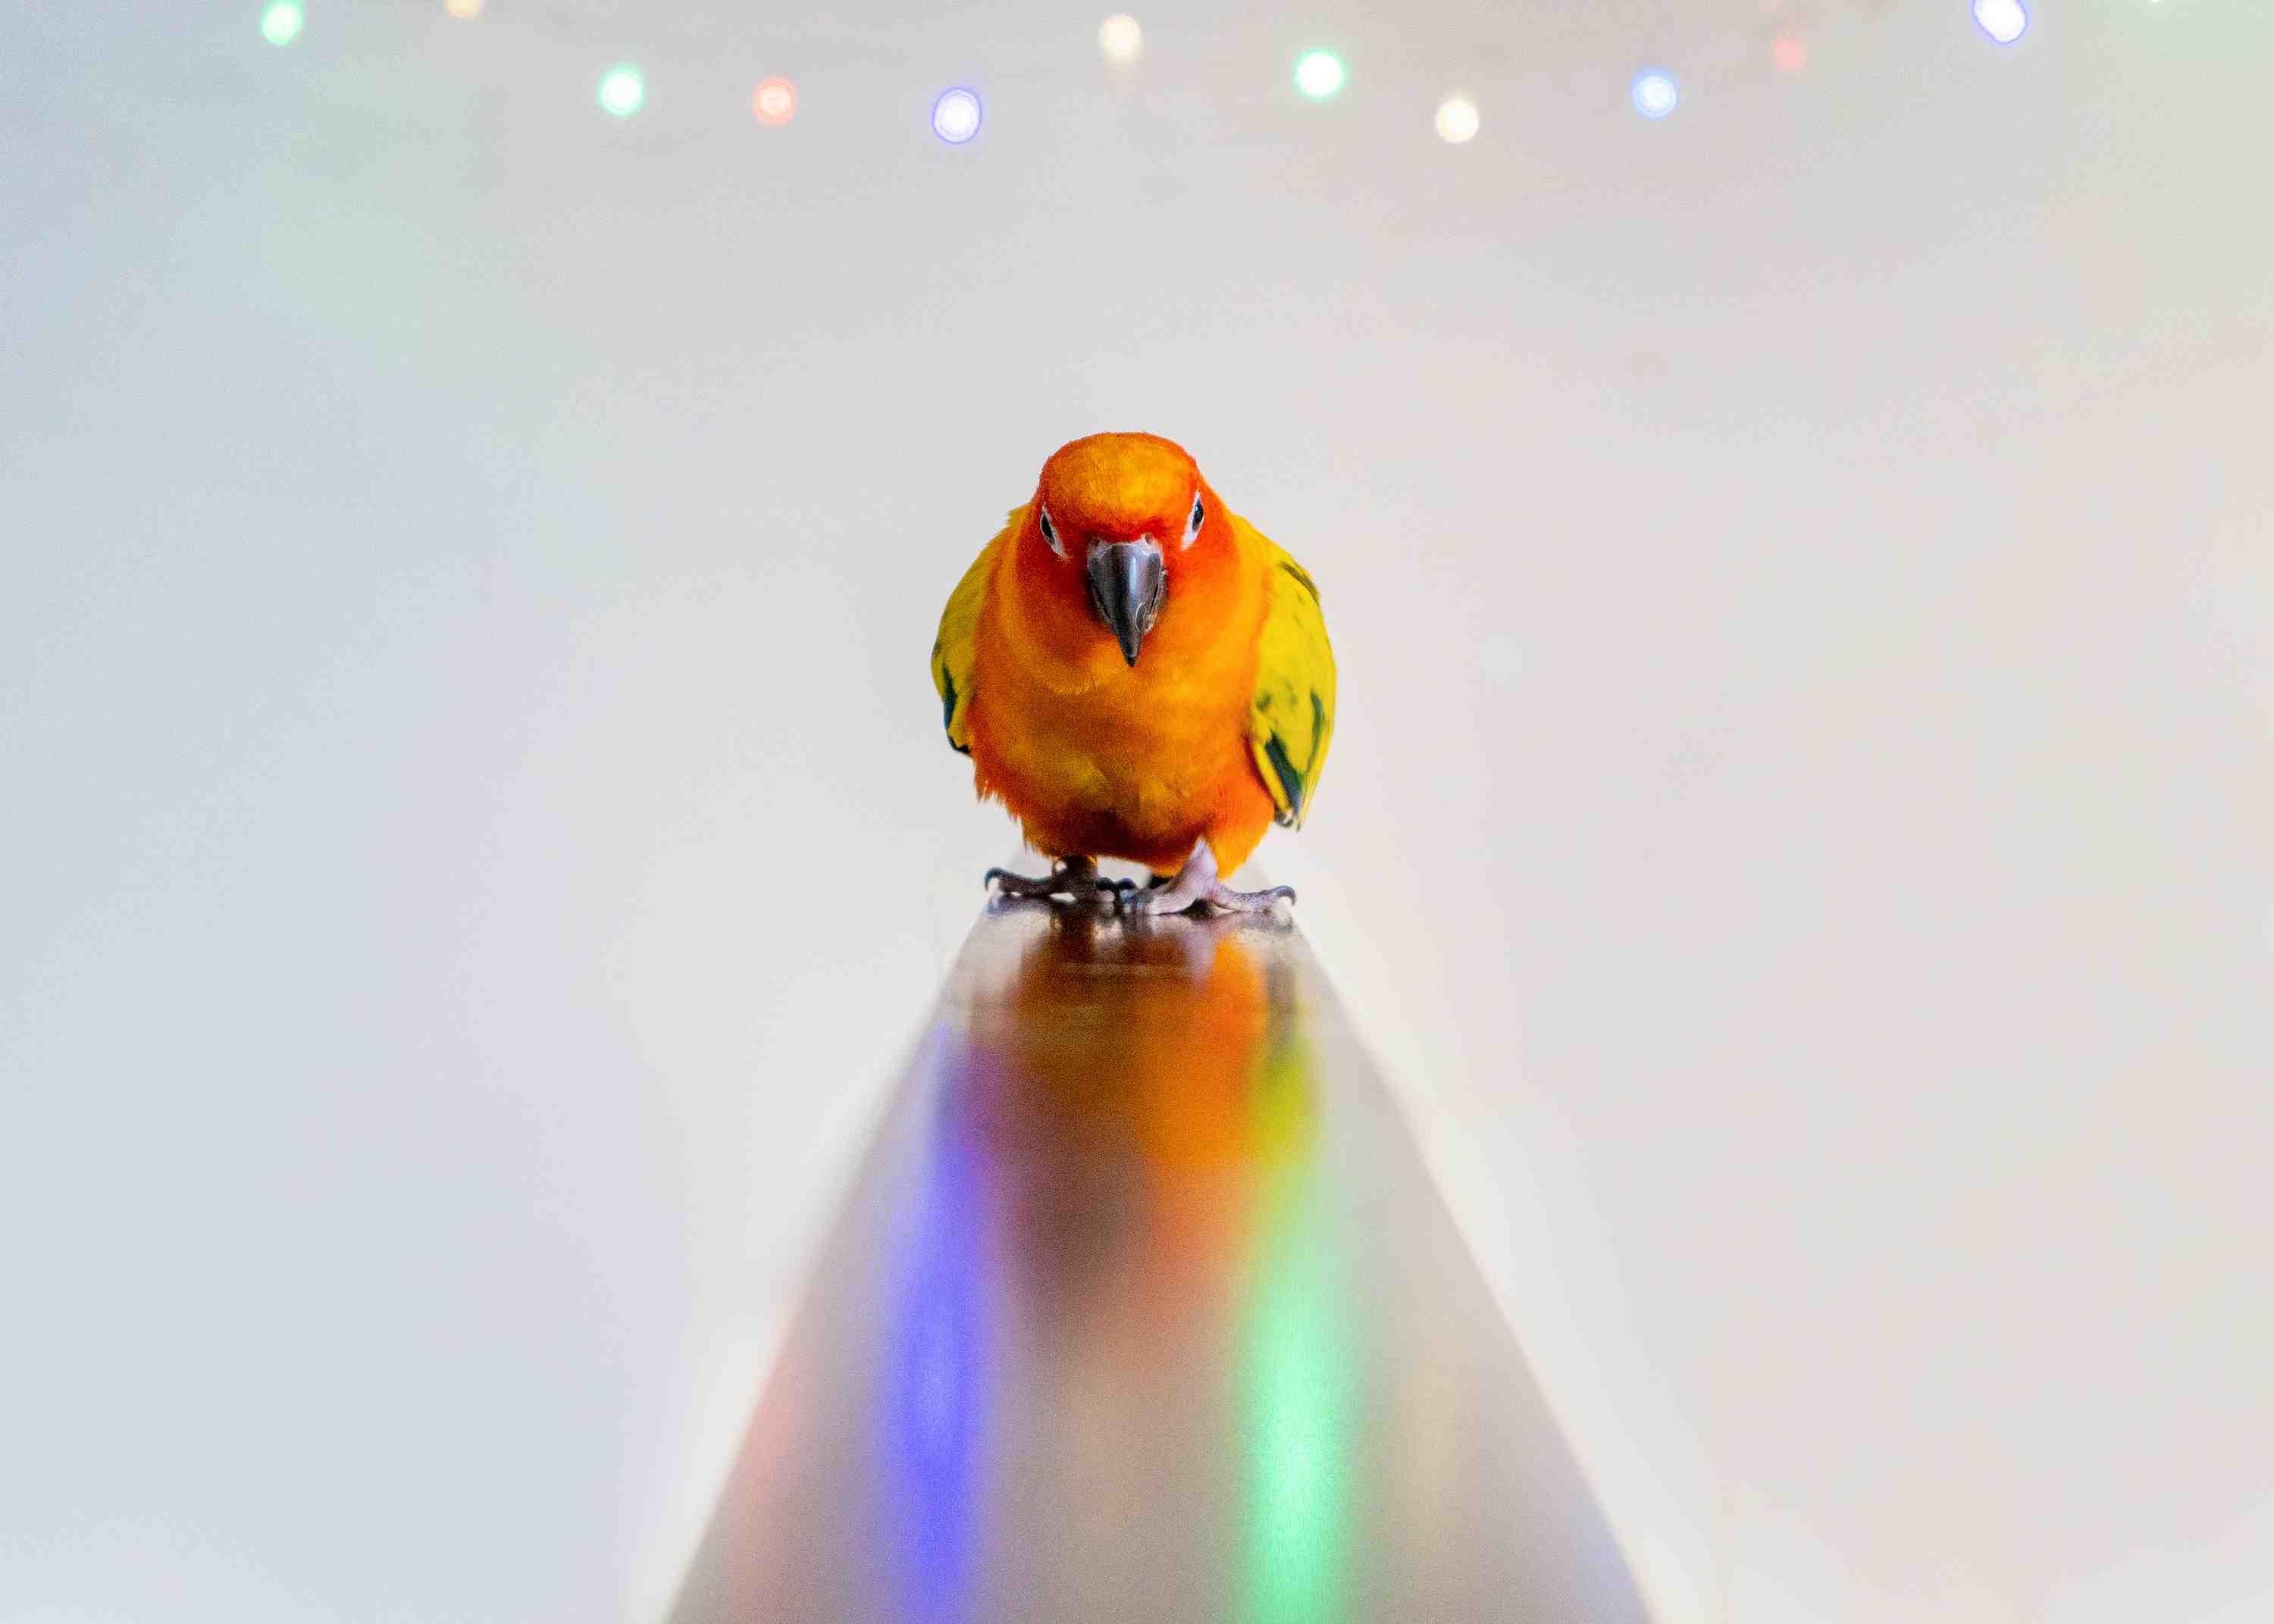 sun conure parrot flying